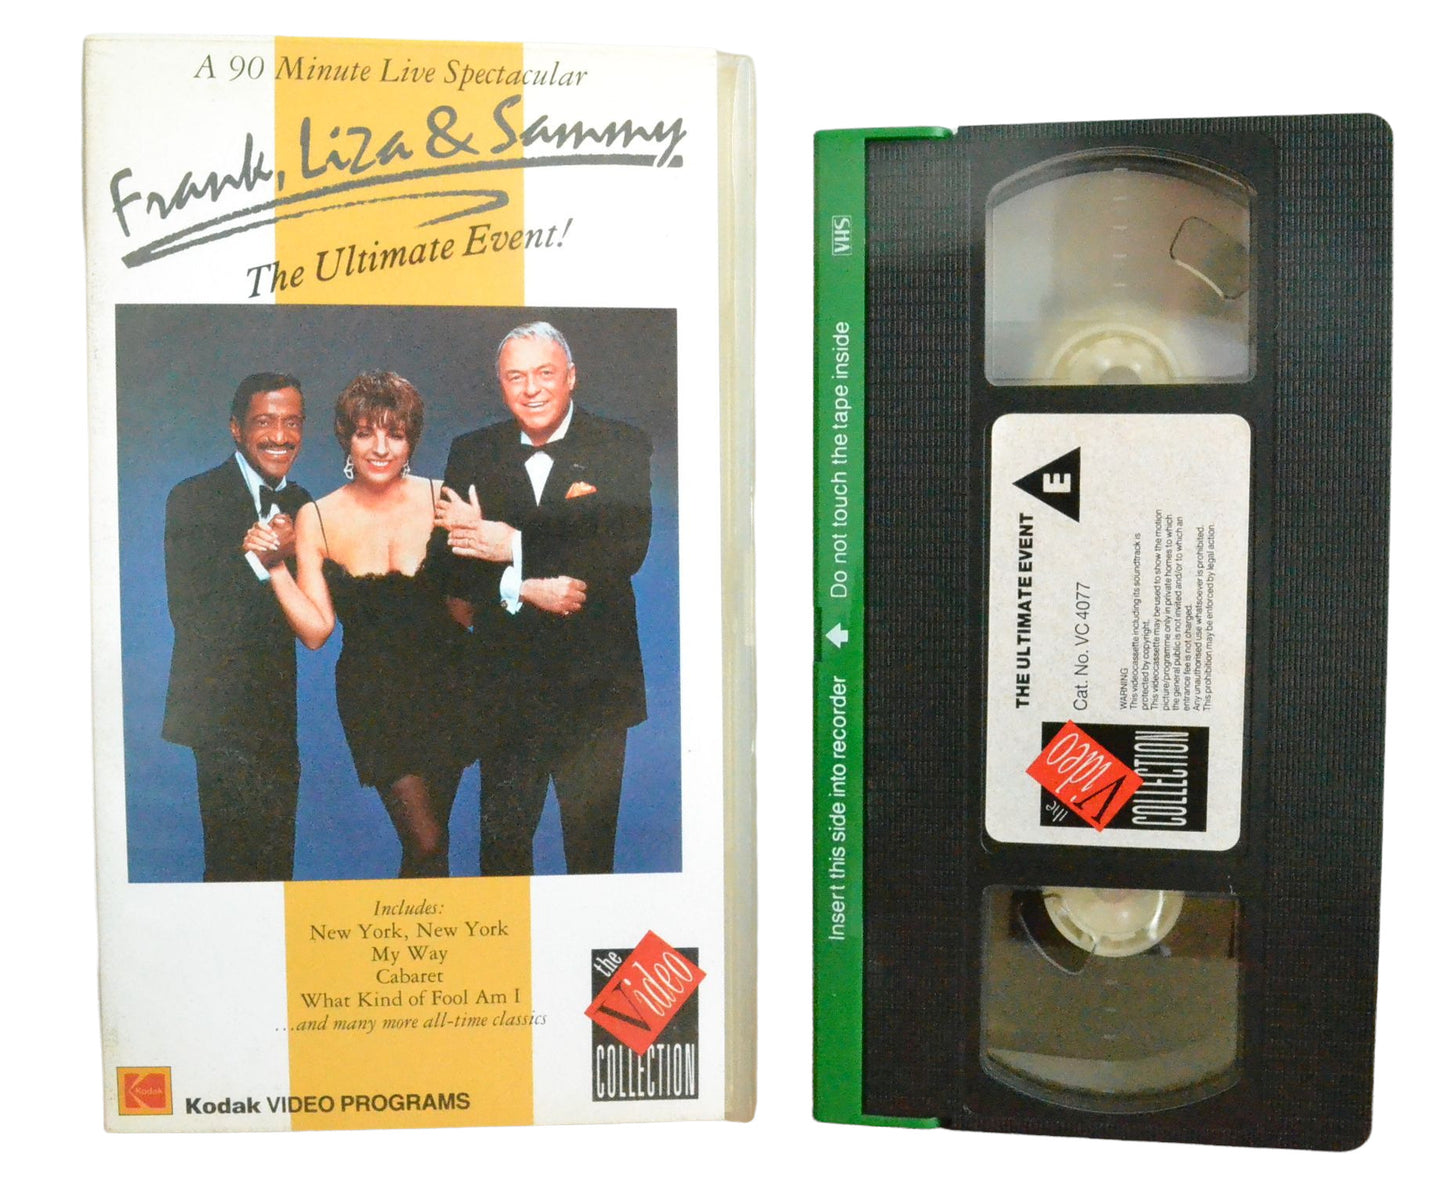 The Ultimate Event! (A 90 Minute Live Spectacular) - Frank Sinatra - The Video Collection - Vintage - Pal VHS-